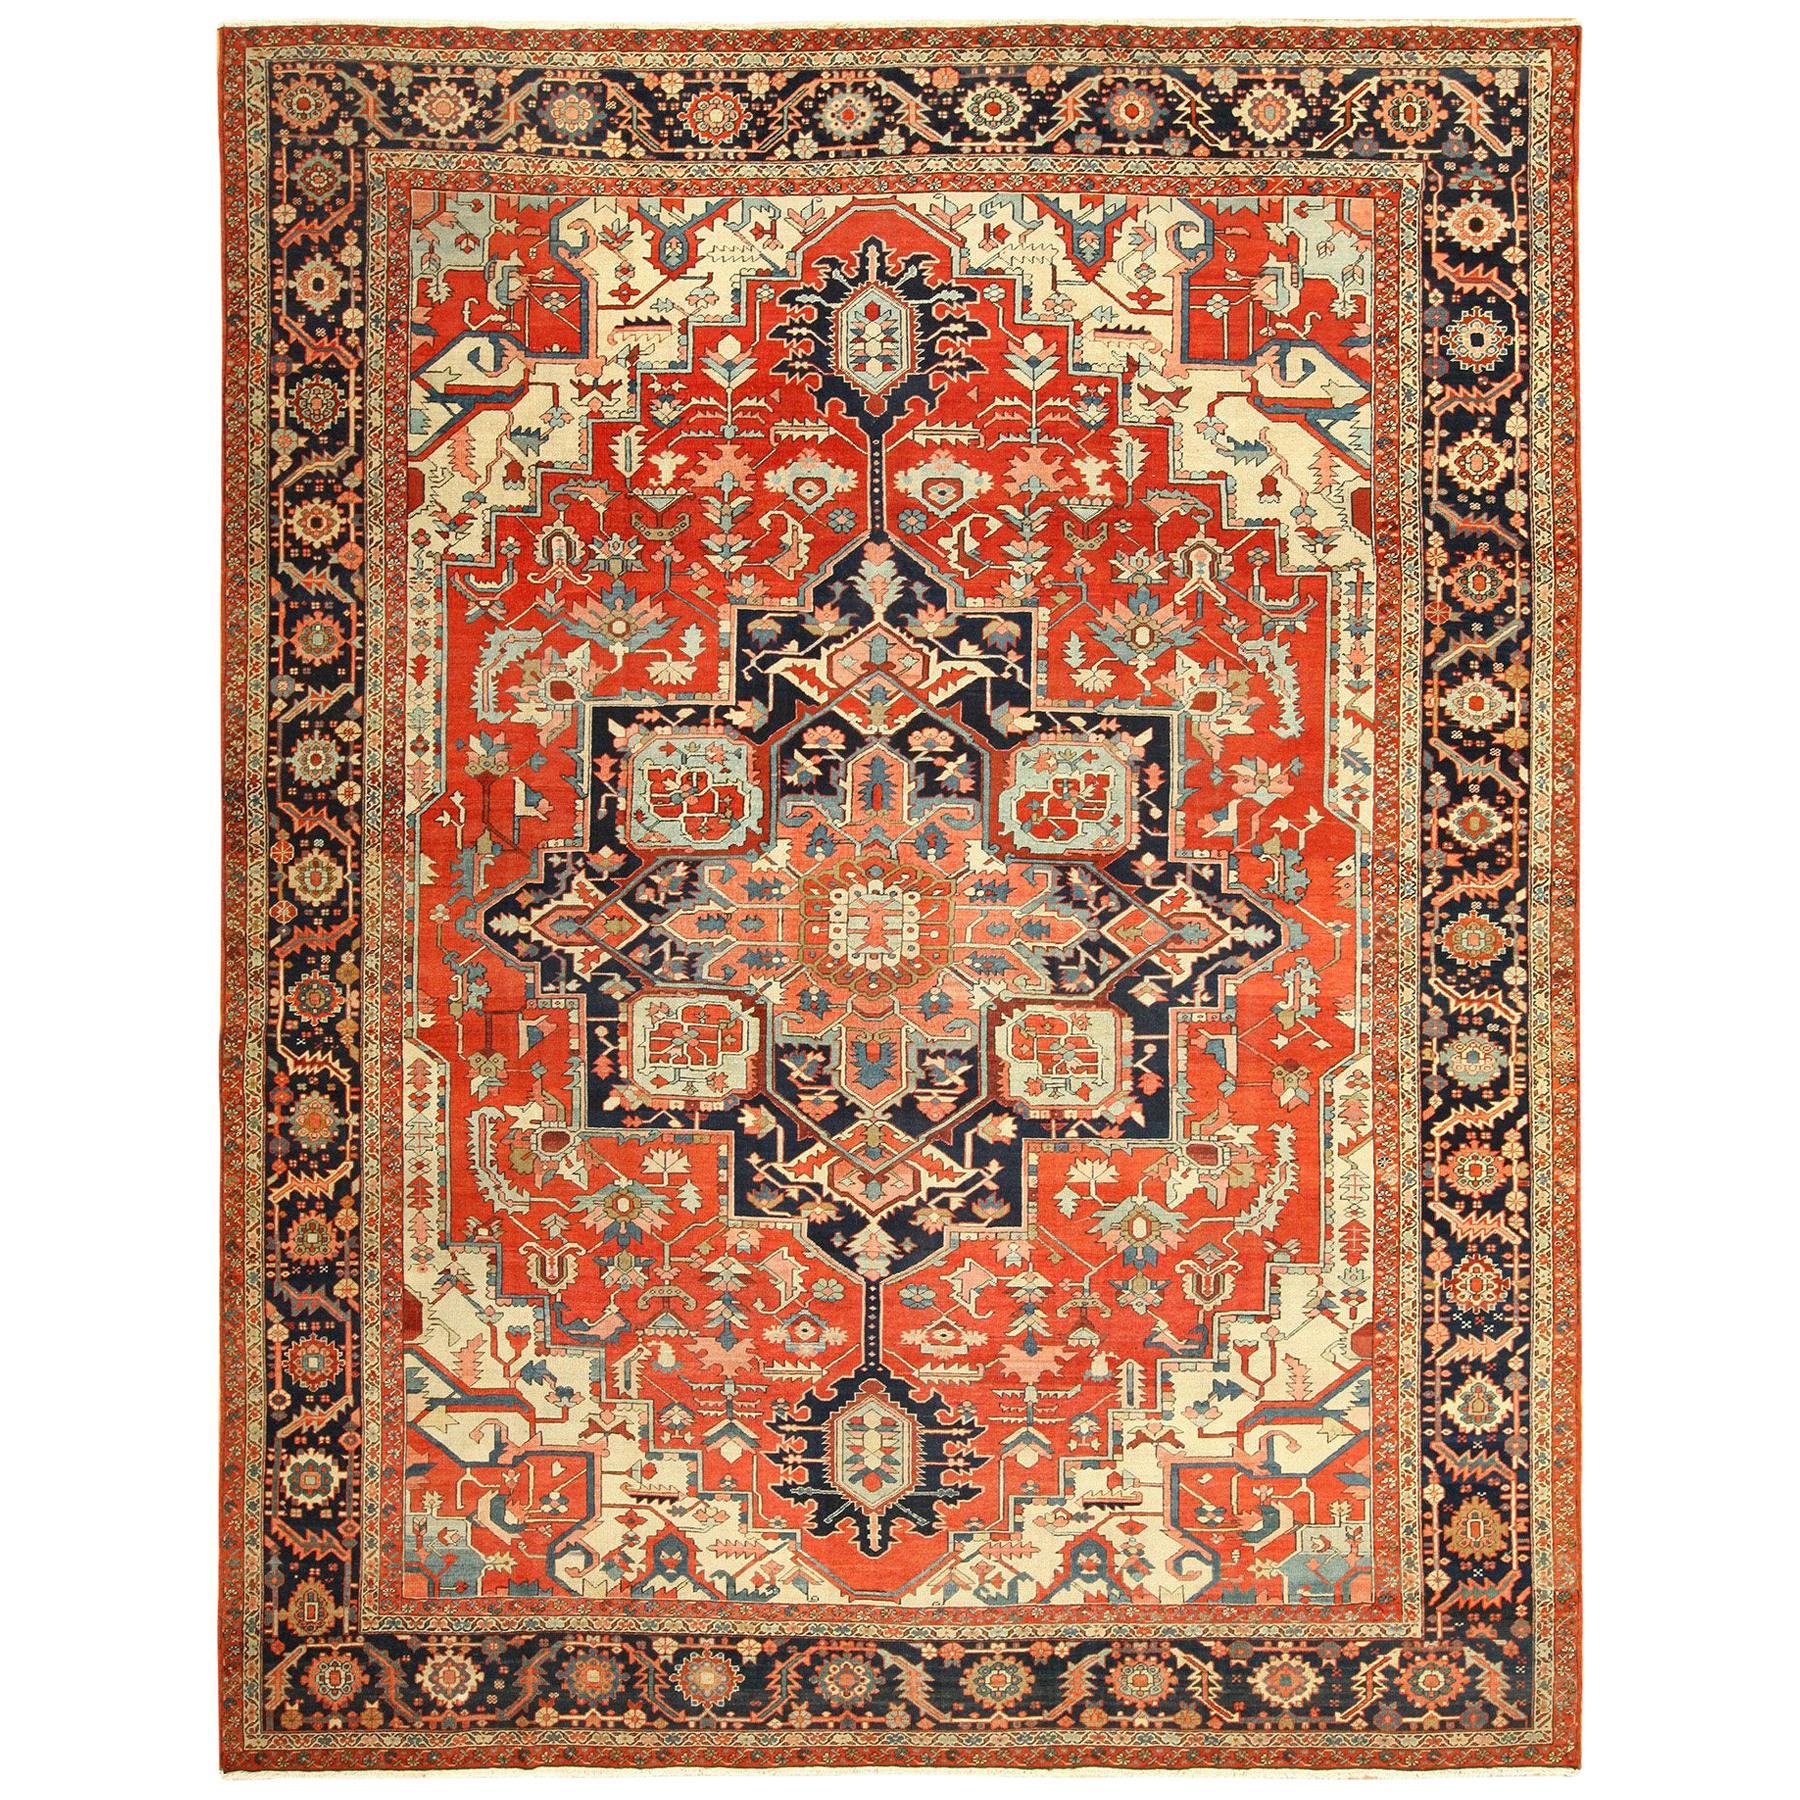 Antique Serapi Persian Rug. Size: 10 ft 4 in x 13 ft 6 in (3.15 m x 4.11 m)